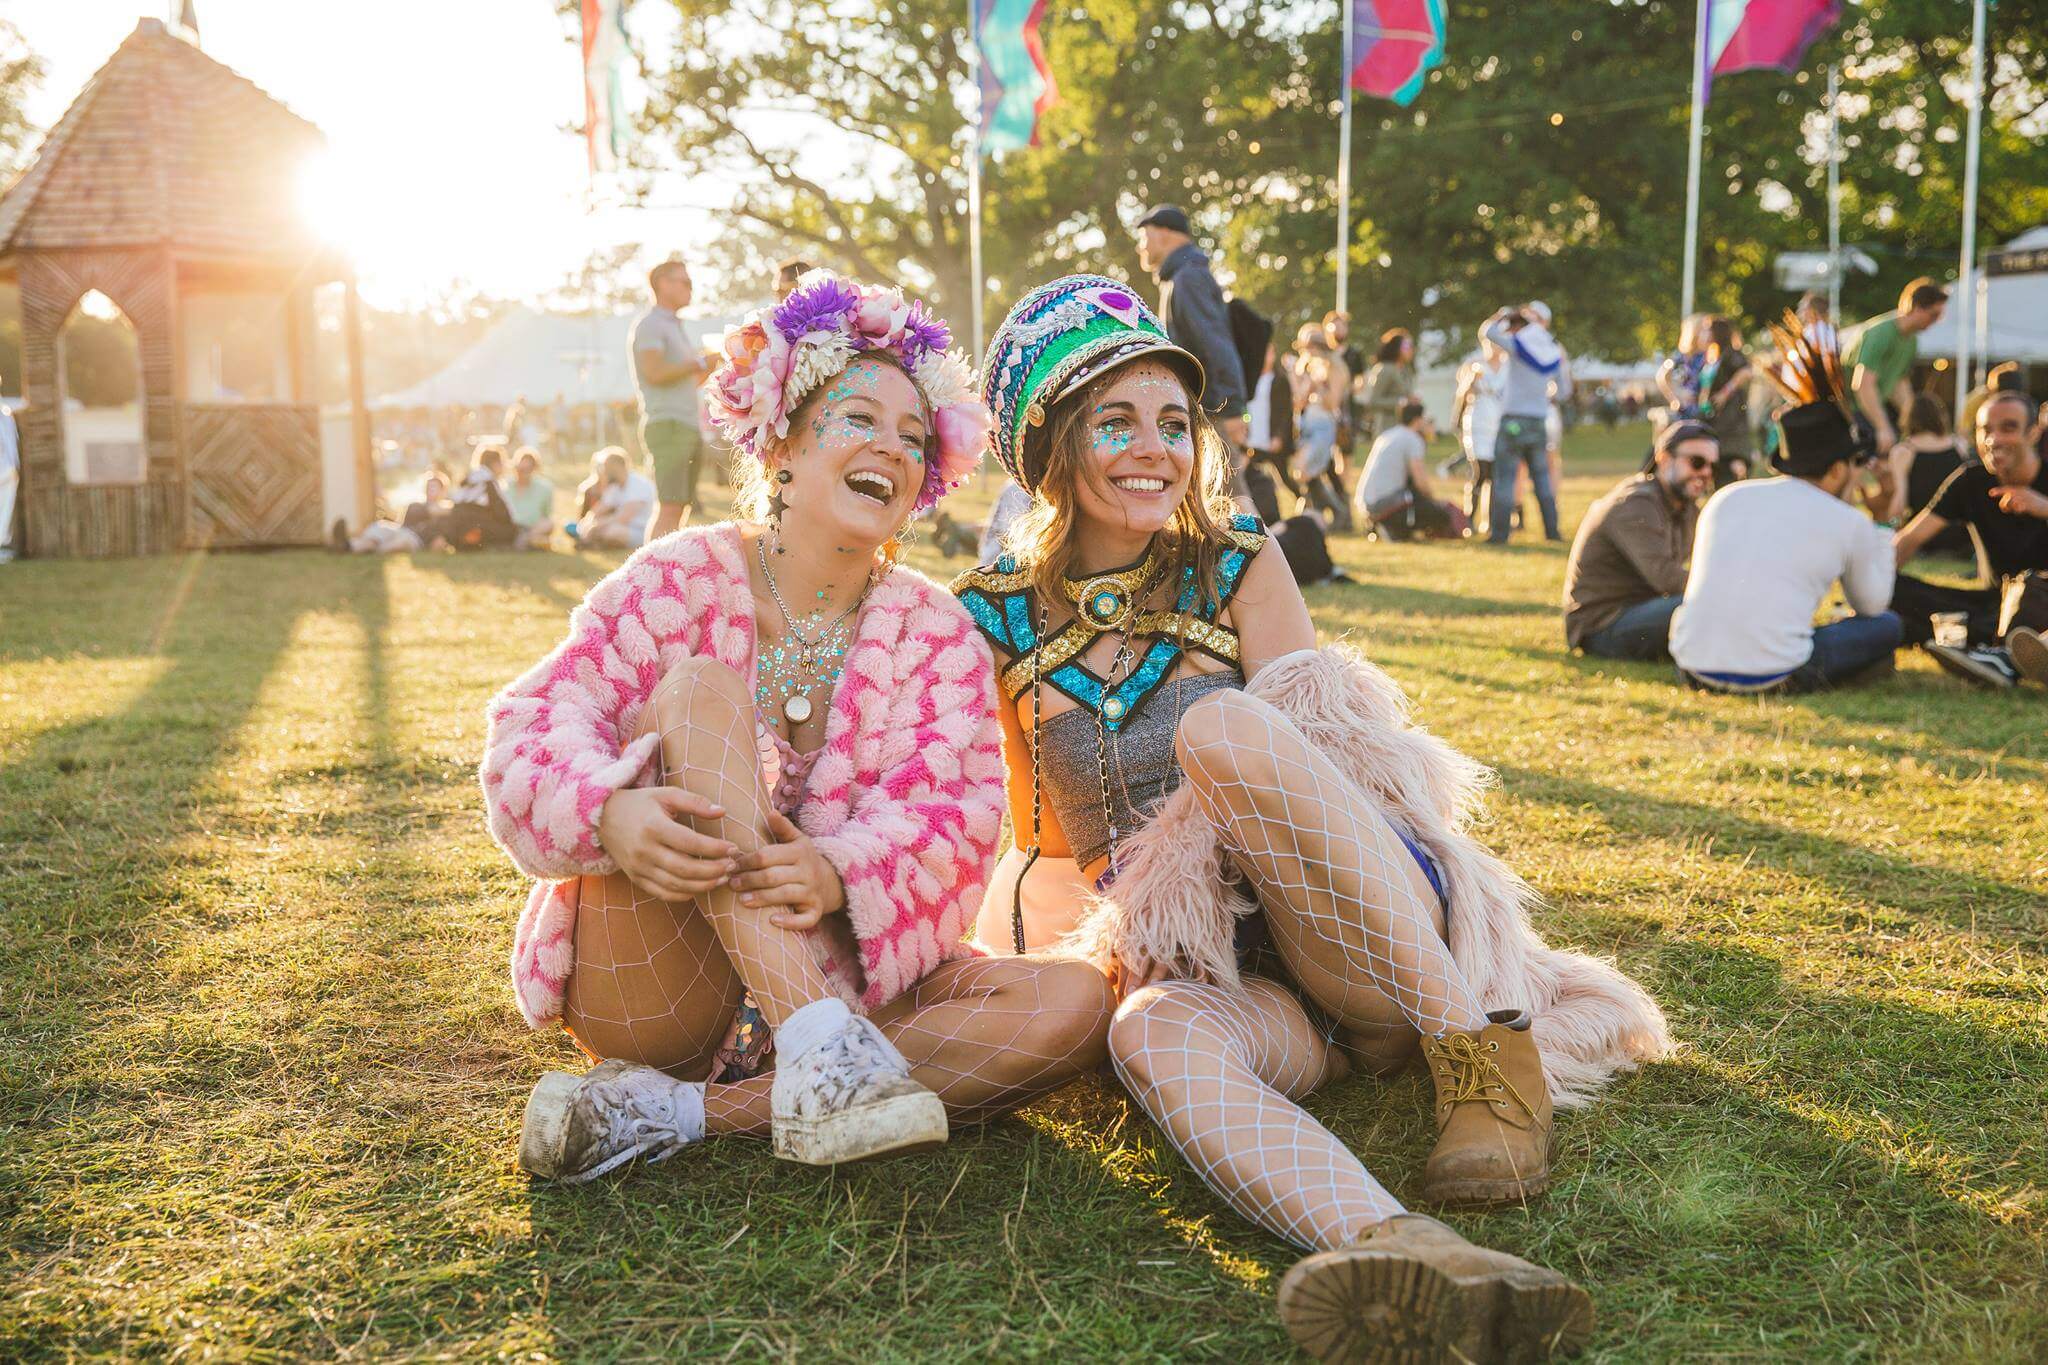 18 Unique Things to Do at Wilderness Festival